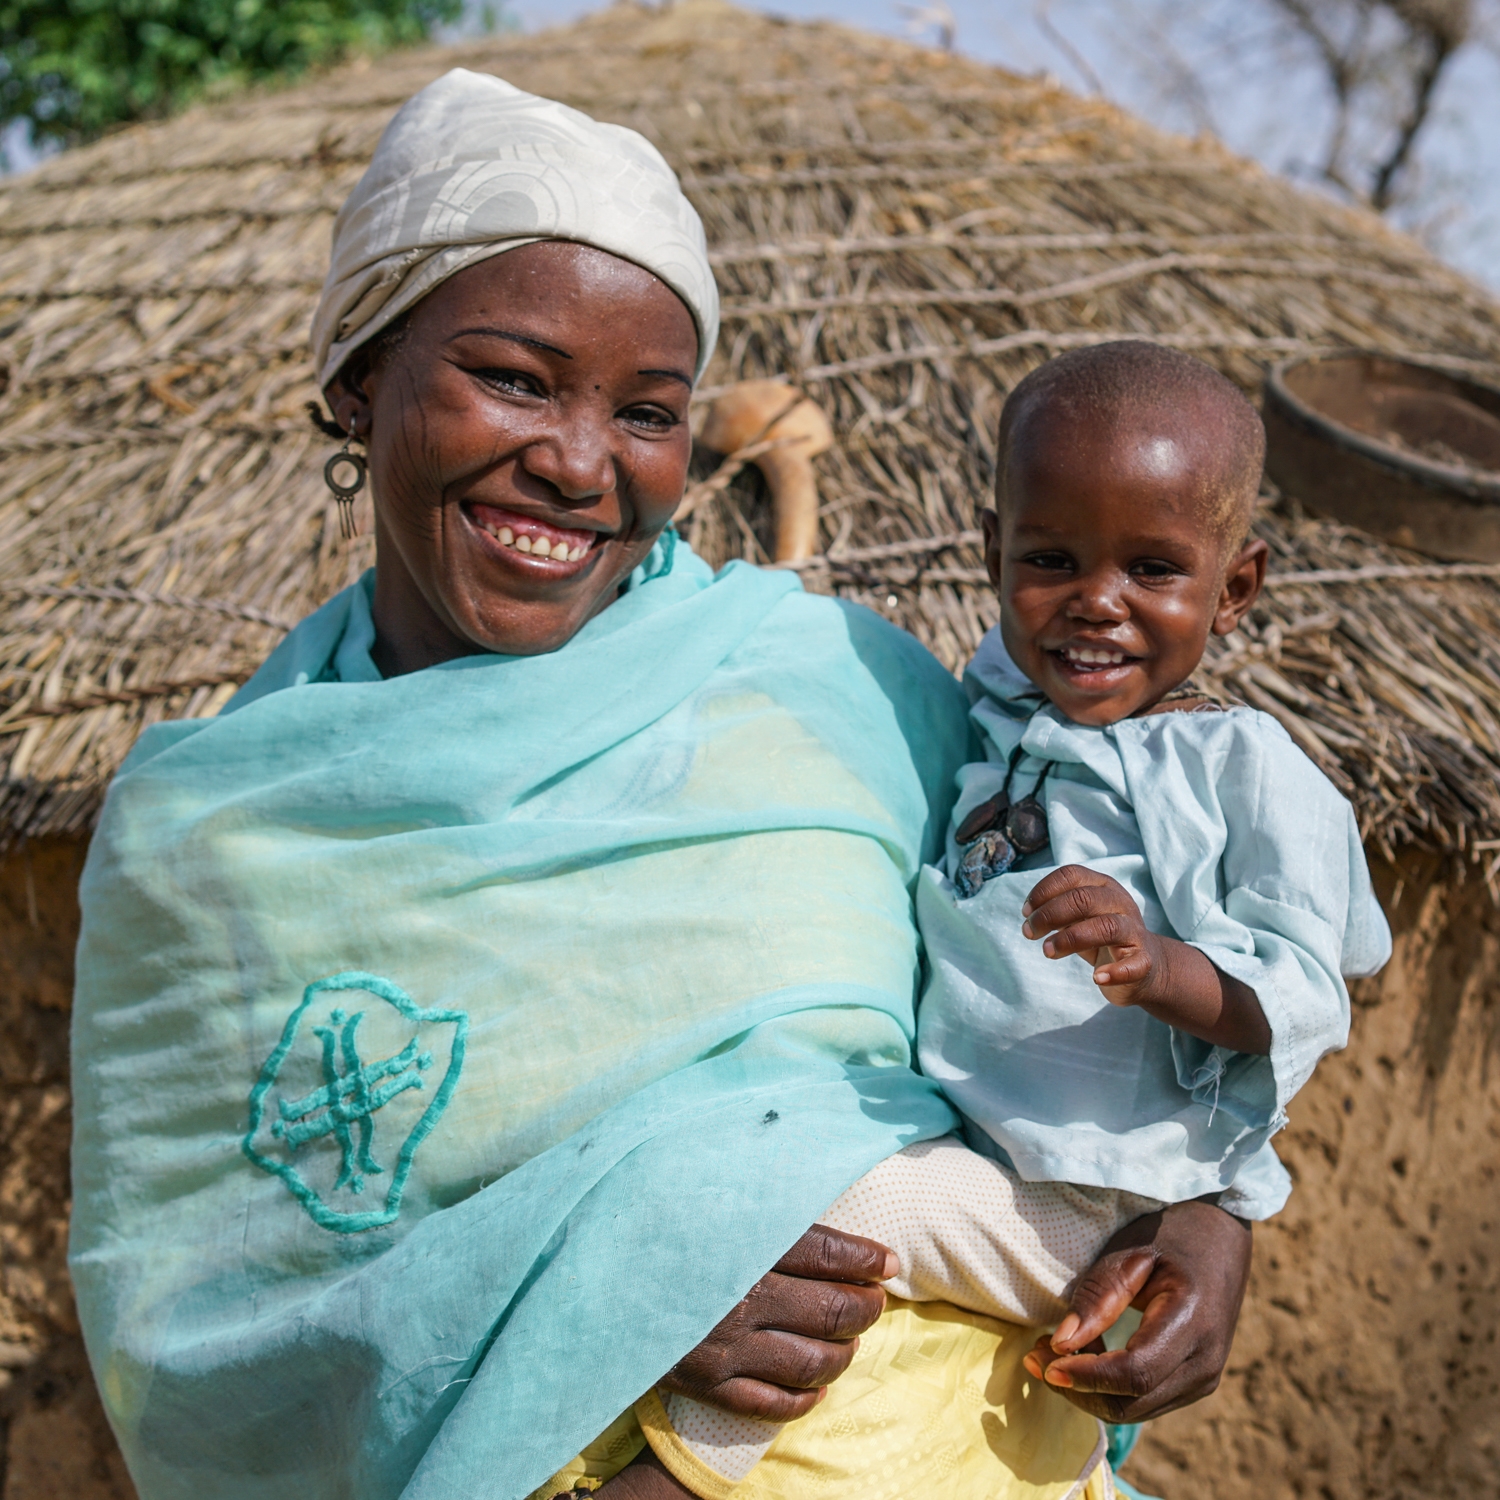 Rabiou and mother Fatima at home in their village in Niger. Photo Credit: Talitha Brauer/Save the Children, 2016.